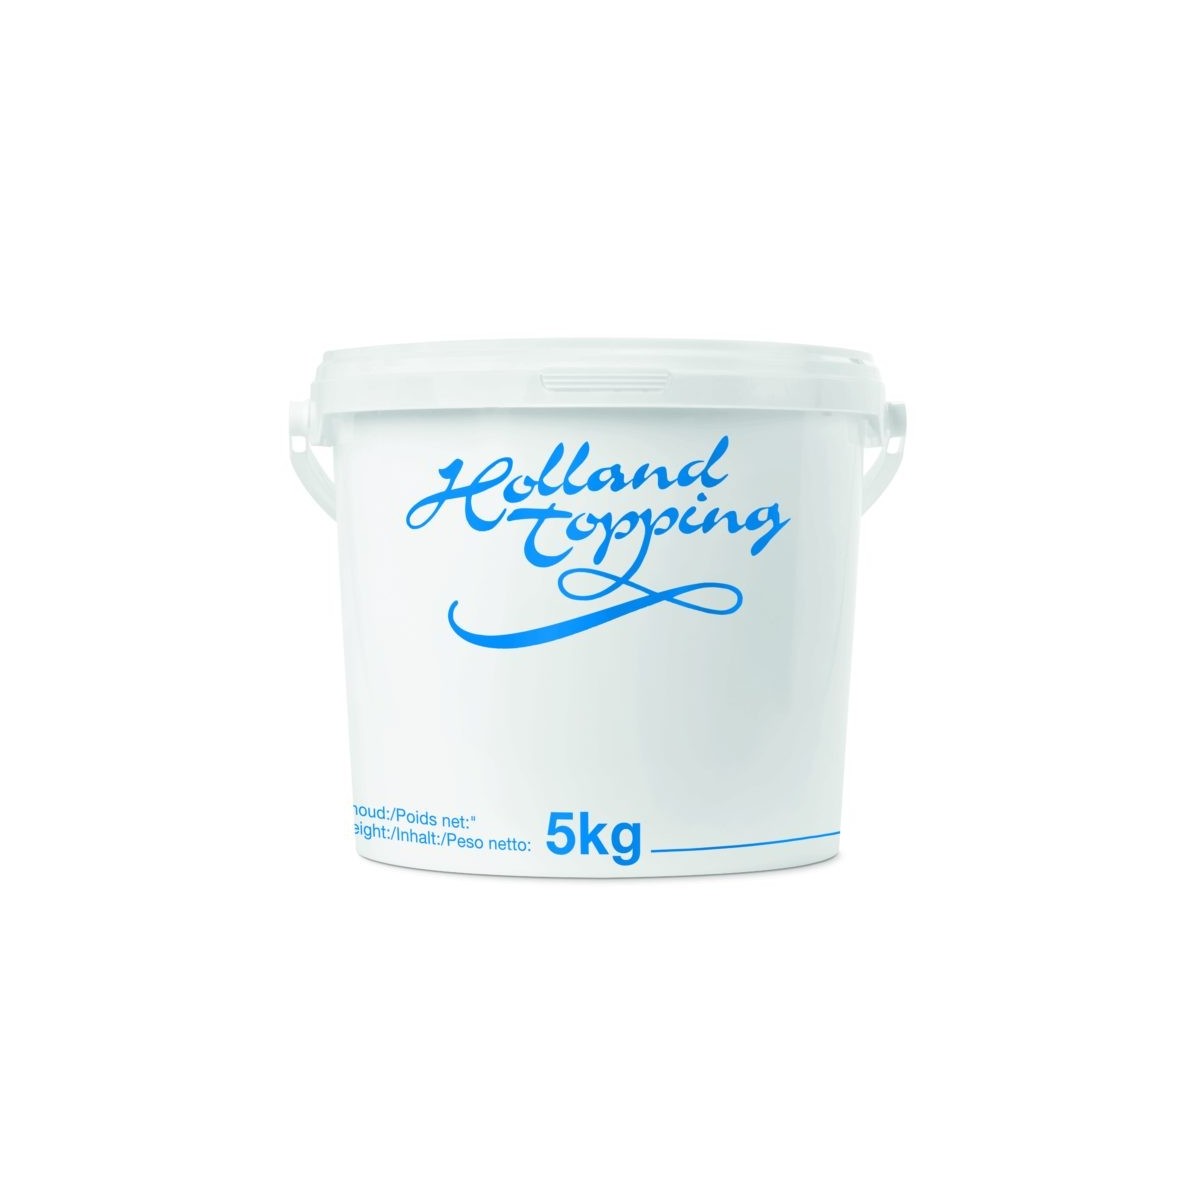 HOLLAND TOPPING WHIPPED CREAM WITH SUGAR - FROZEN  5KG  KG